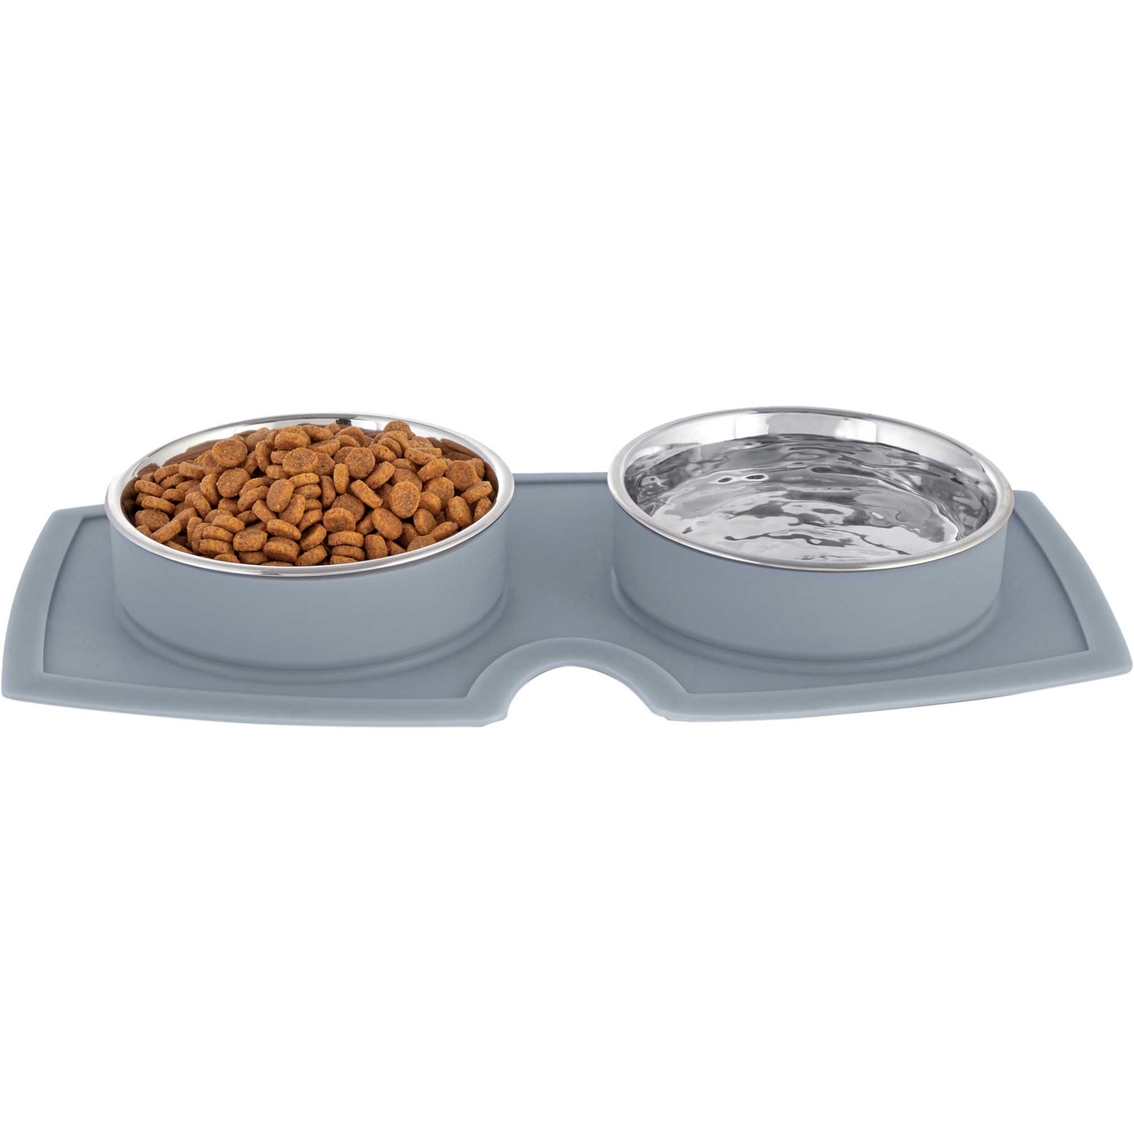 Harmony Silicone Double Diner Dog Bowl Set, 2.1 Cup - Image 3 of 3